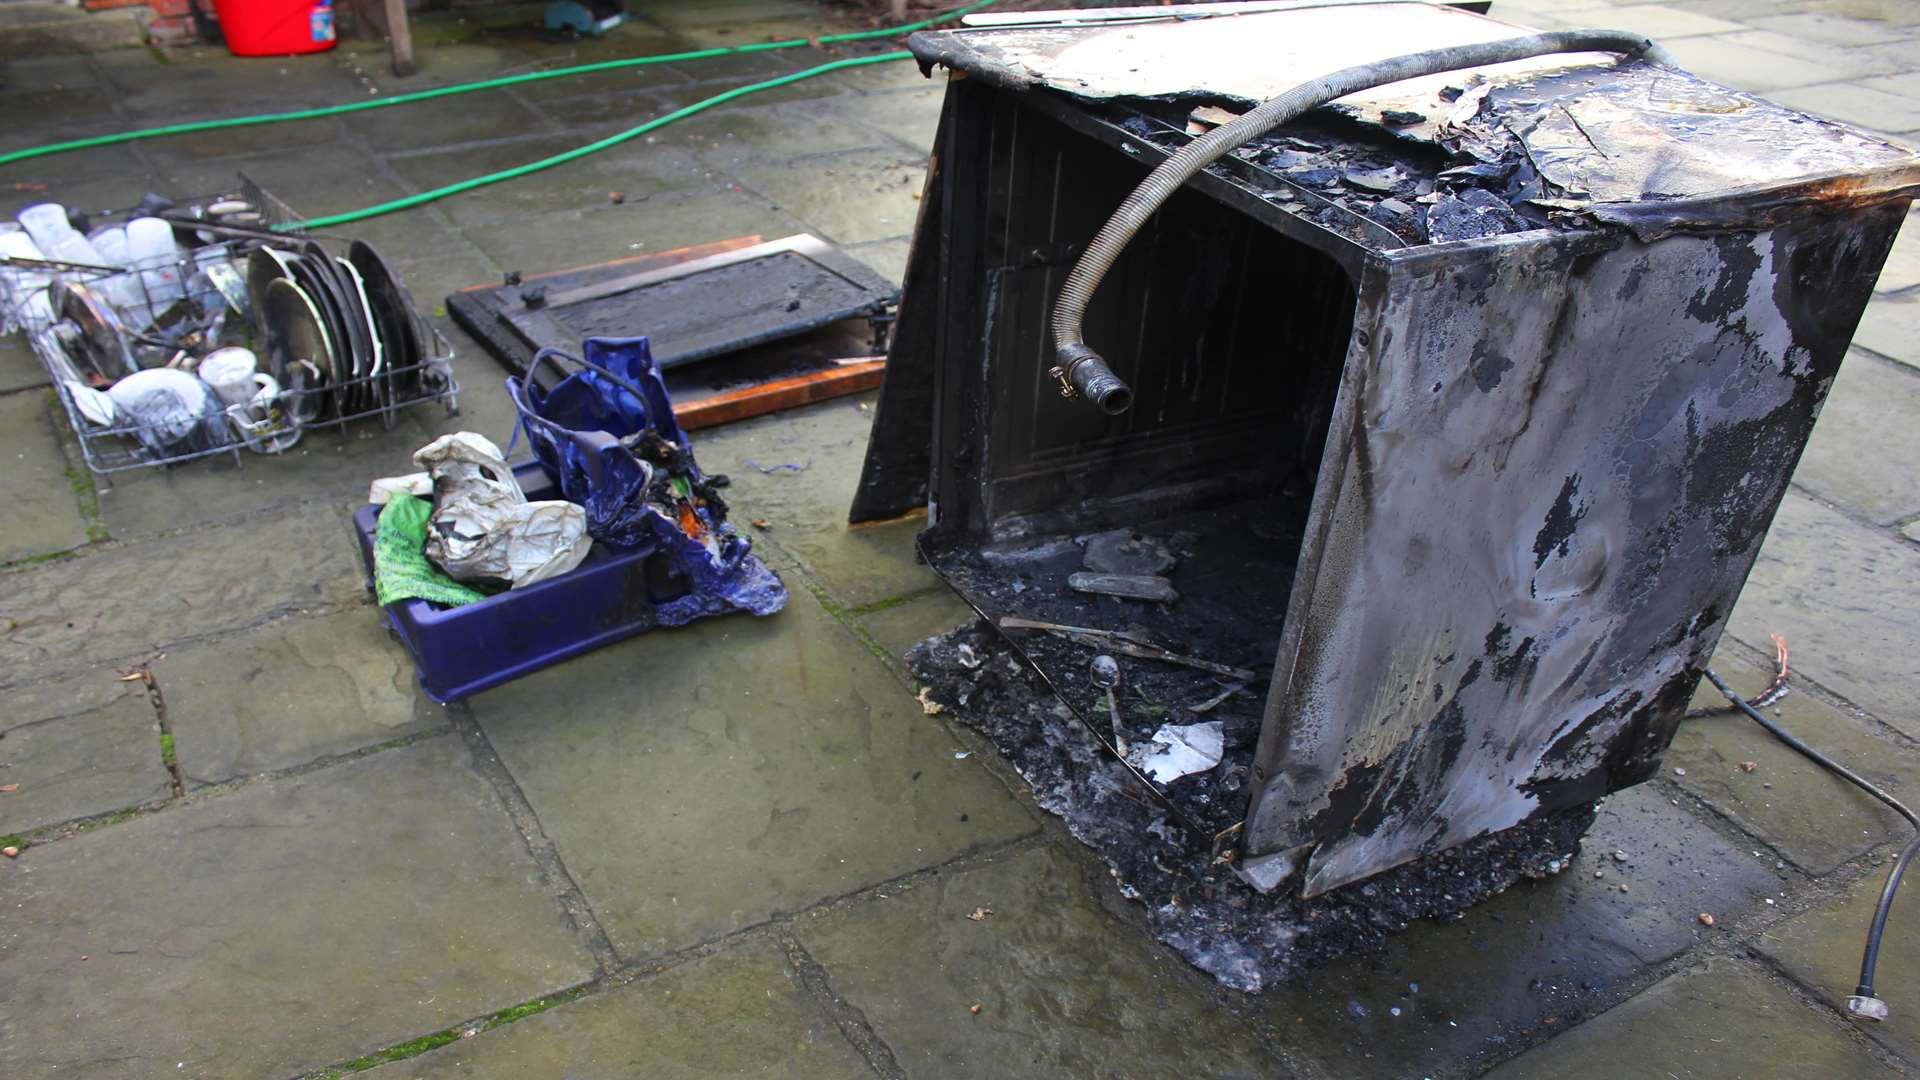 The dishwasher caught fire in the early hours of Tuesday morning. Picture: Kent Fire and Rescue Service